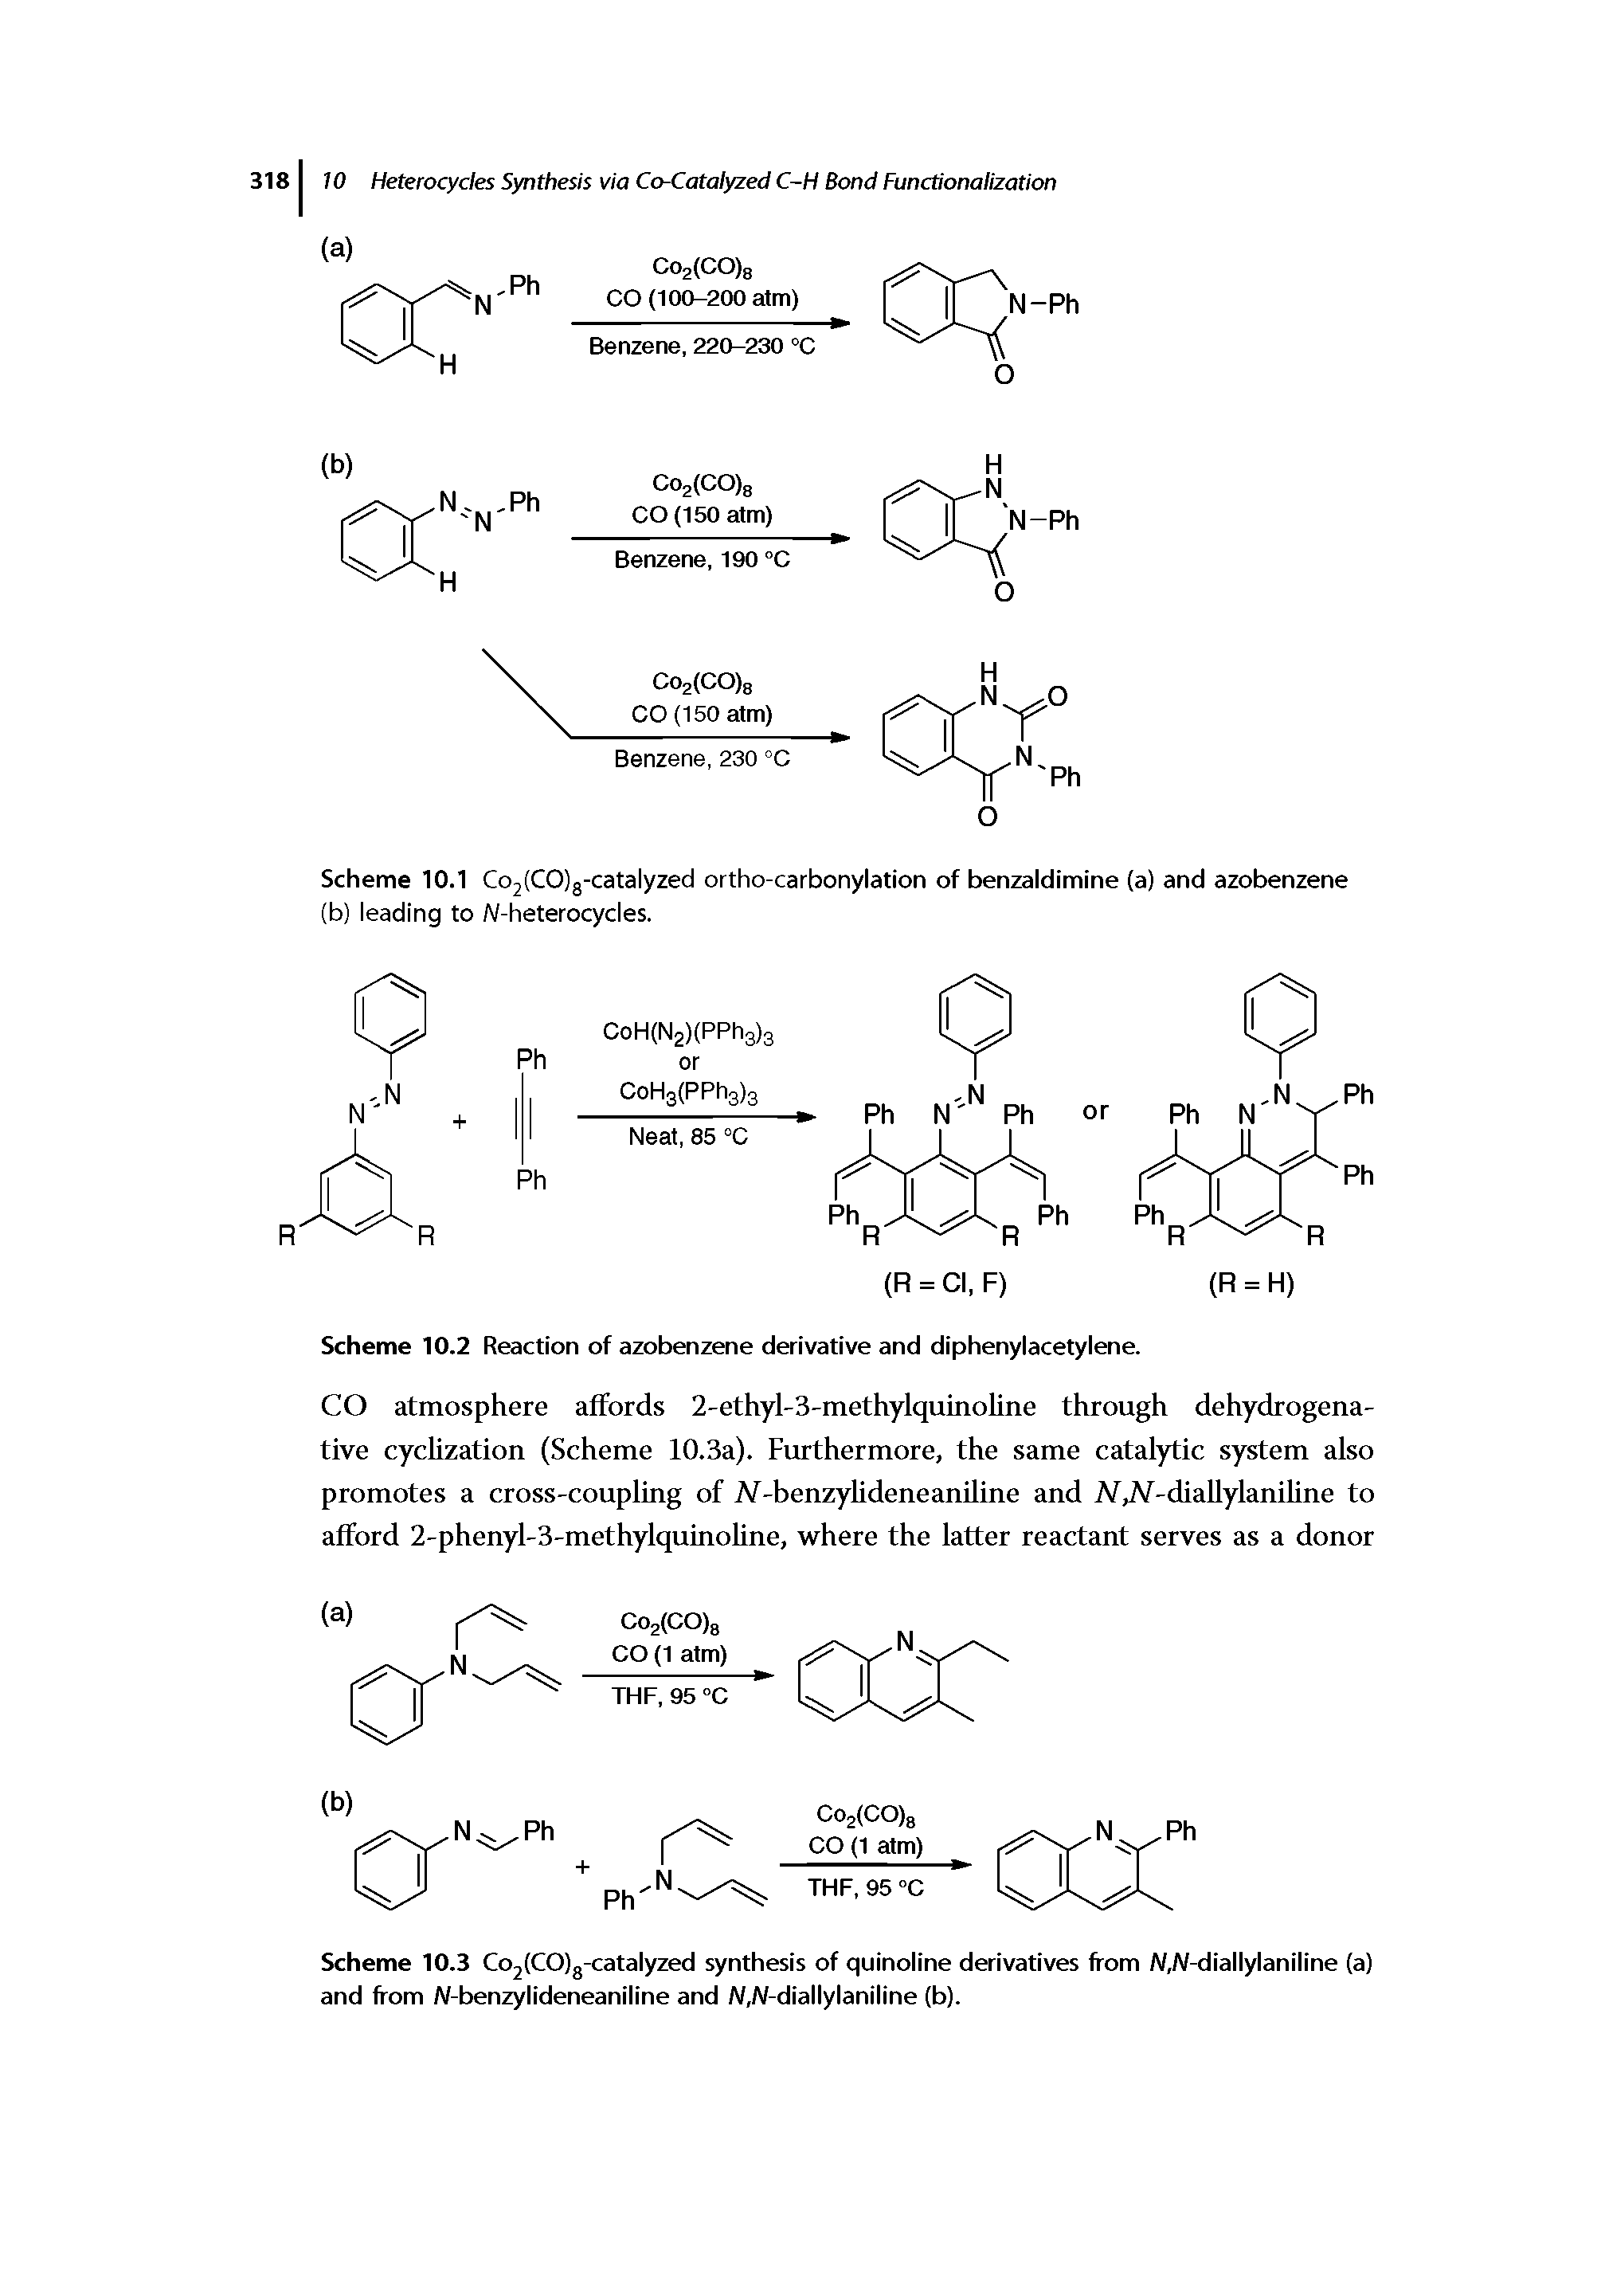 Scheme 10.3 Co2(CO)g-catalyzed synthesis of quinoline derivatives from N,Af-diallylaniline (a) and from N-benzylideneaniline and AflV-diallylaniline (b).